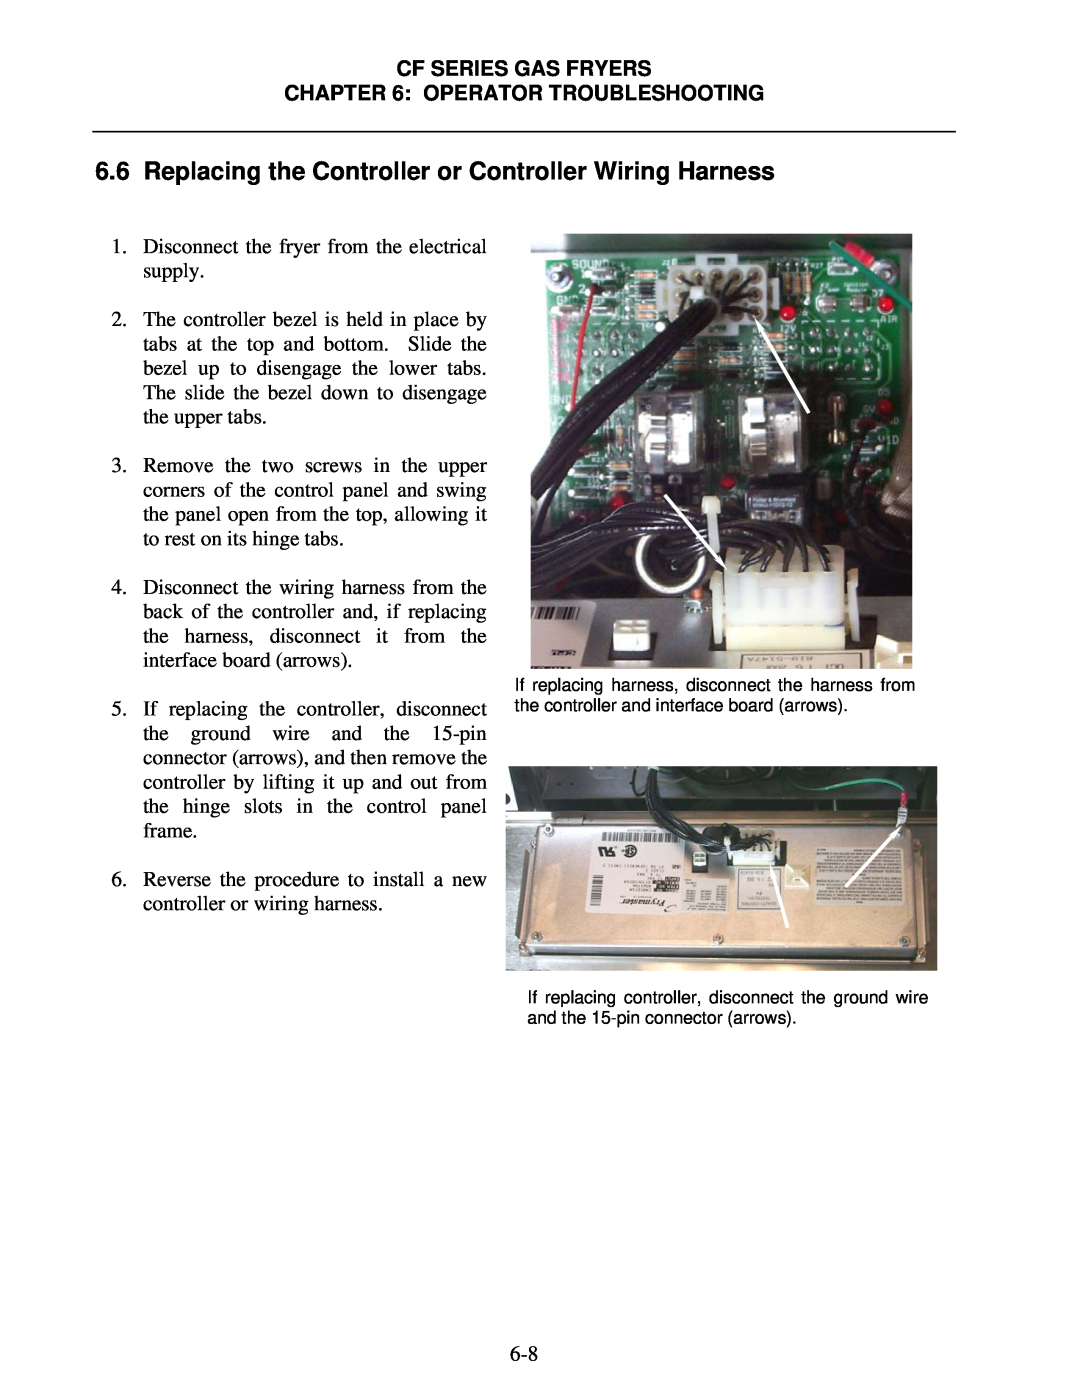 Frymaster FMCF operation manual Replacing the Controller or Controller Wiring Harness 